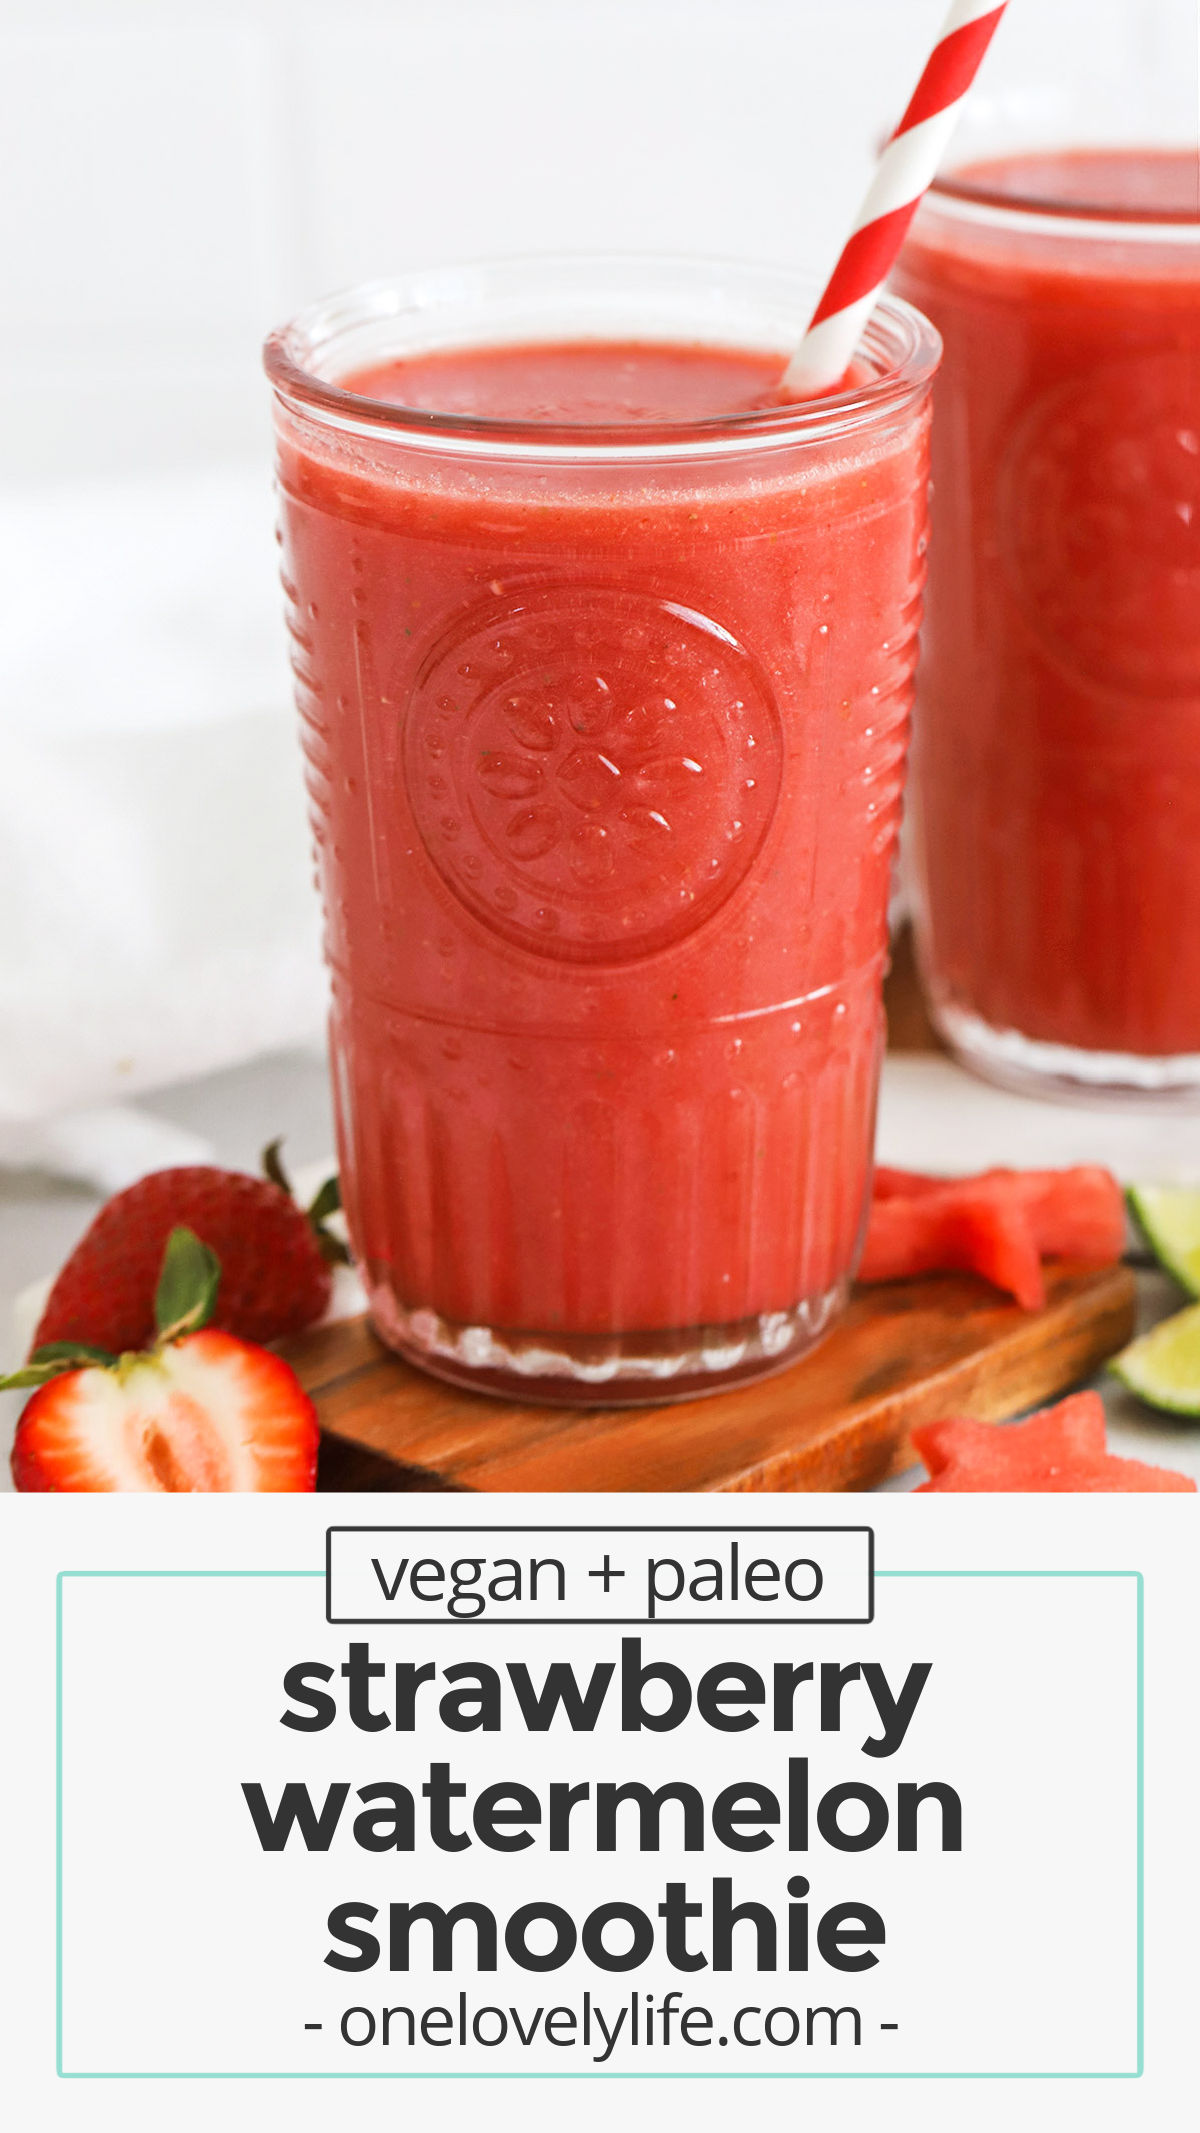 Strawberry Watermelon Smoothie - This is the best watermelon smoothie recipe we know! Super hydrating, delicious & easy! // berry watermelon smoothie / the best watermelon smoothies // strawberry watermelon smoothies // smoothie with watermelon / berry watermelon smoothies // summer smoothies // watermelon recipes / vegan smoothie / fruit smoothie / hydrating drinks / electrolyte drink / healthy summer drink / healthy smoothie / paleo